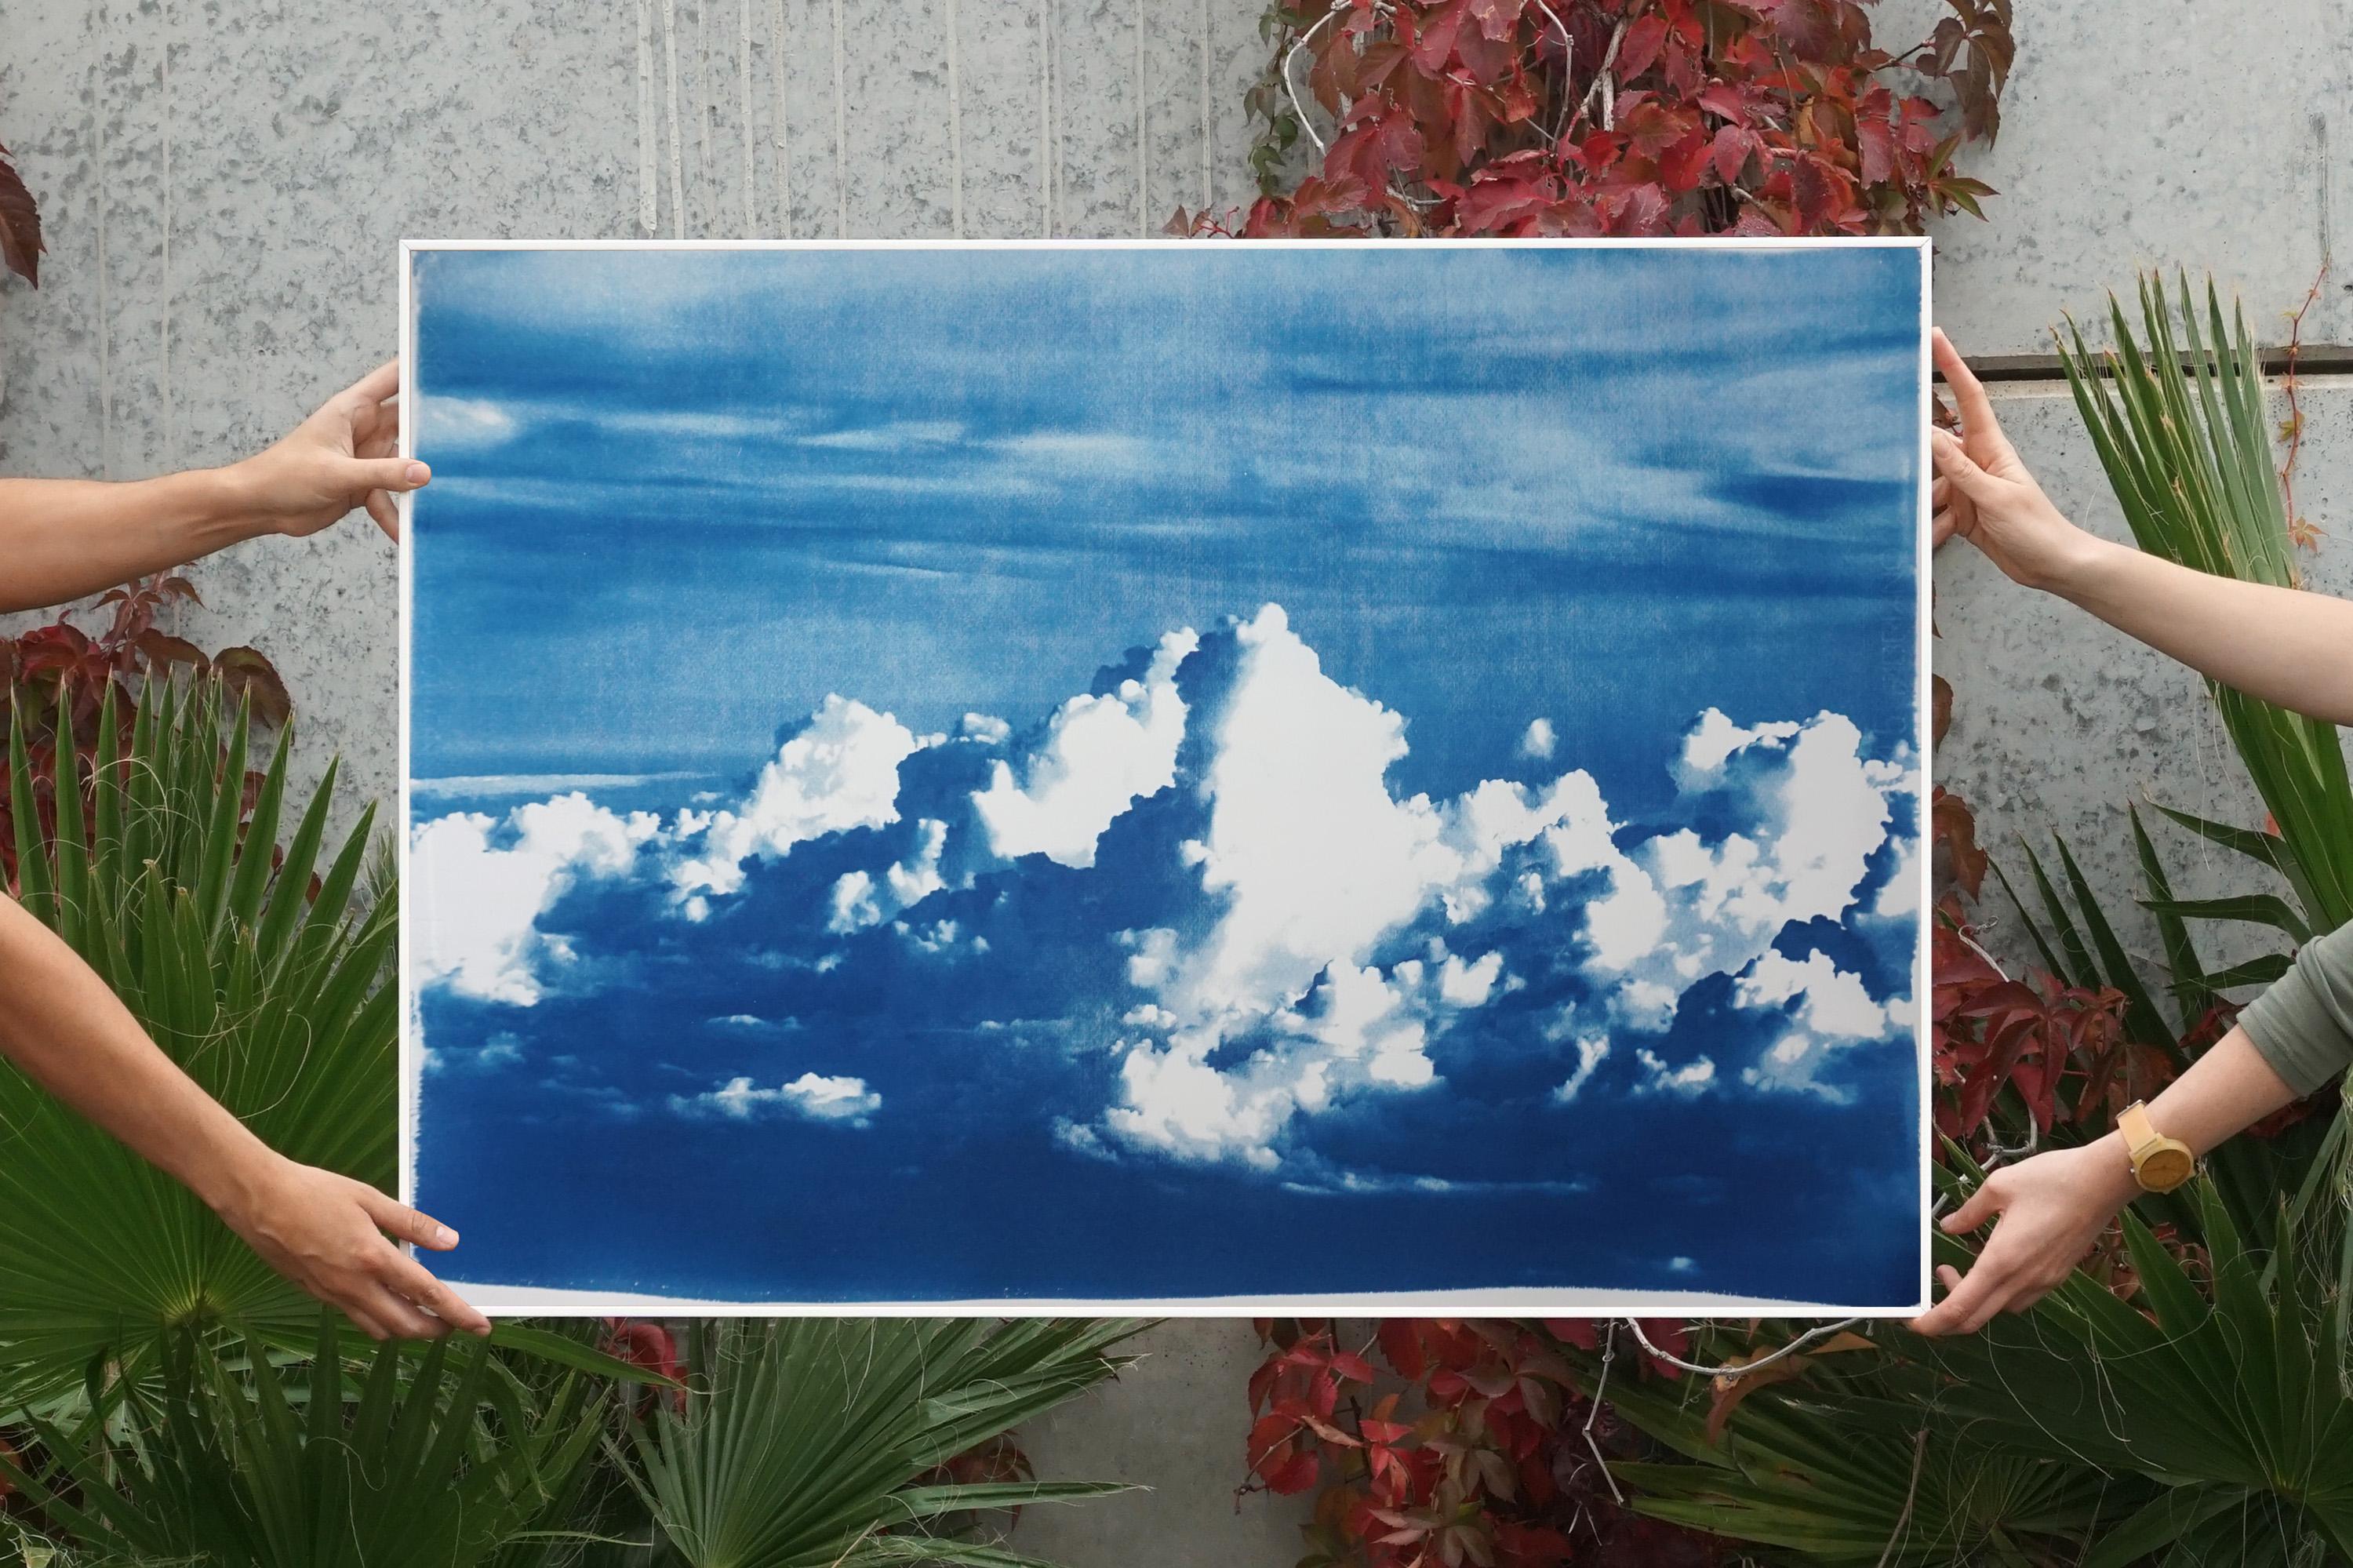 Blustery Clouds After a Storm, Sky Blue Handprinted Cyanotype, Meaningful Scene 2